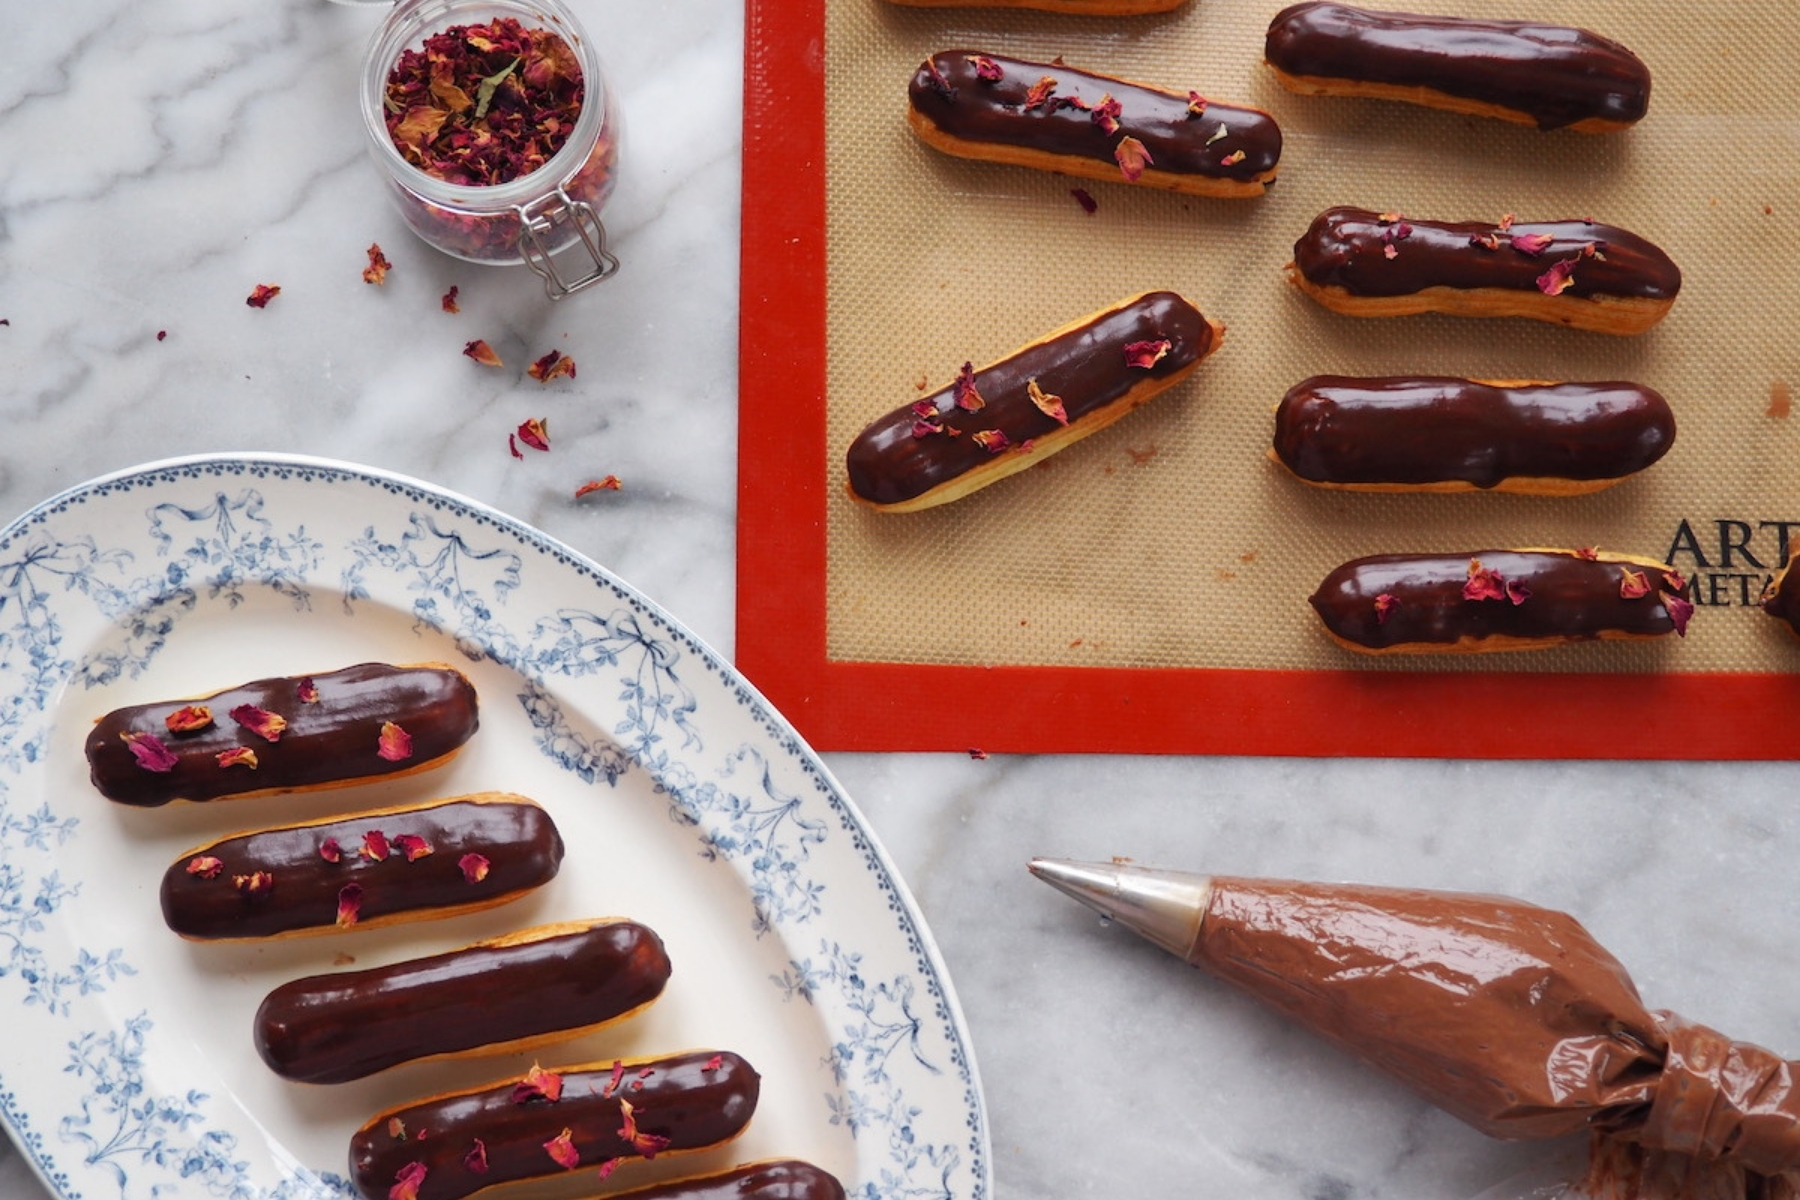 On a marble tabletop, a plate of chocolate eclair with rose petals on top.